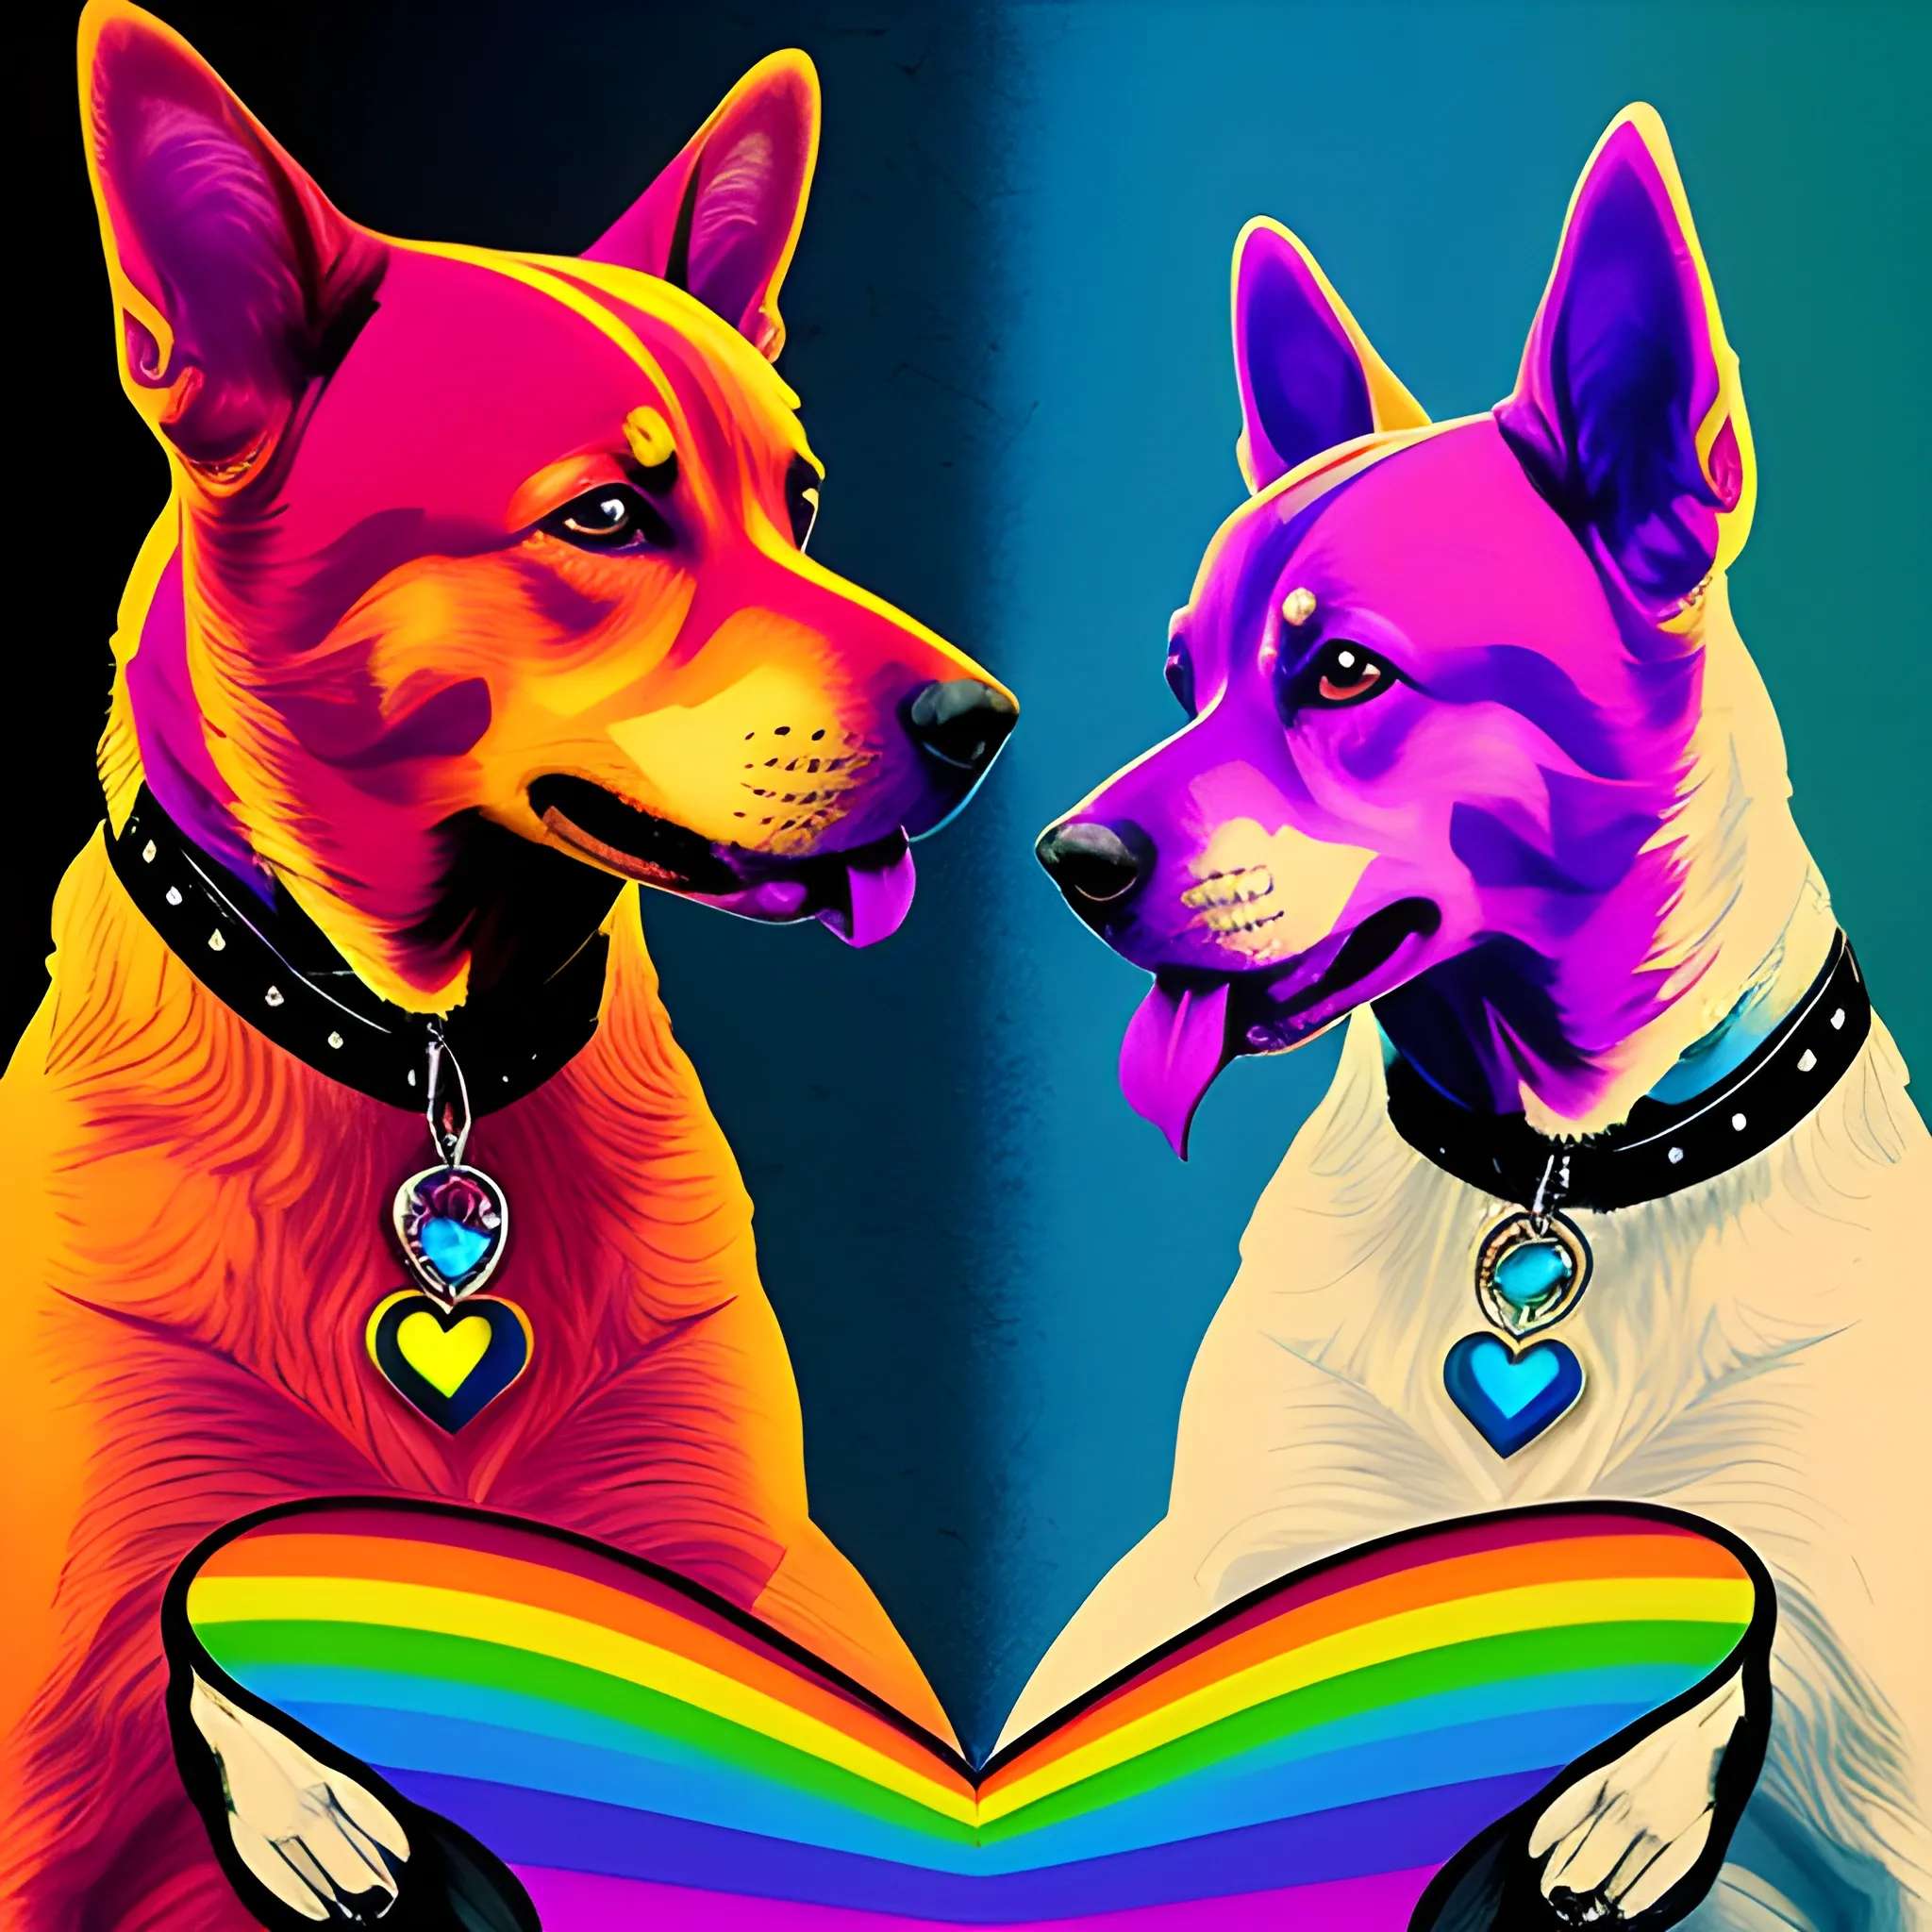 Create a modern rock album cover with colors, where there is a dog in love with a bitch, they are in a rainbow, there must be a real heart, be inspired by the elegance of modern art and make everything as true to reality as possible